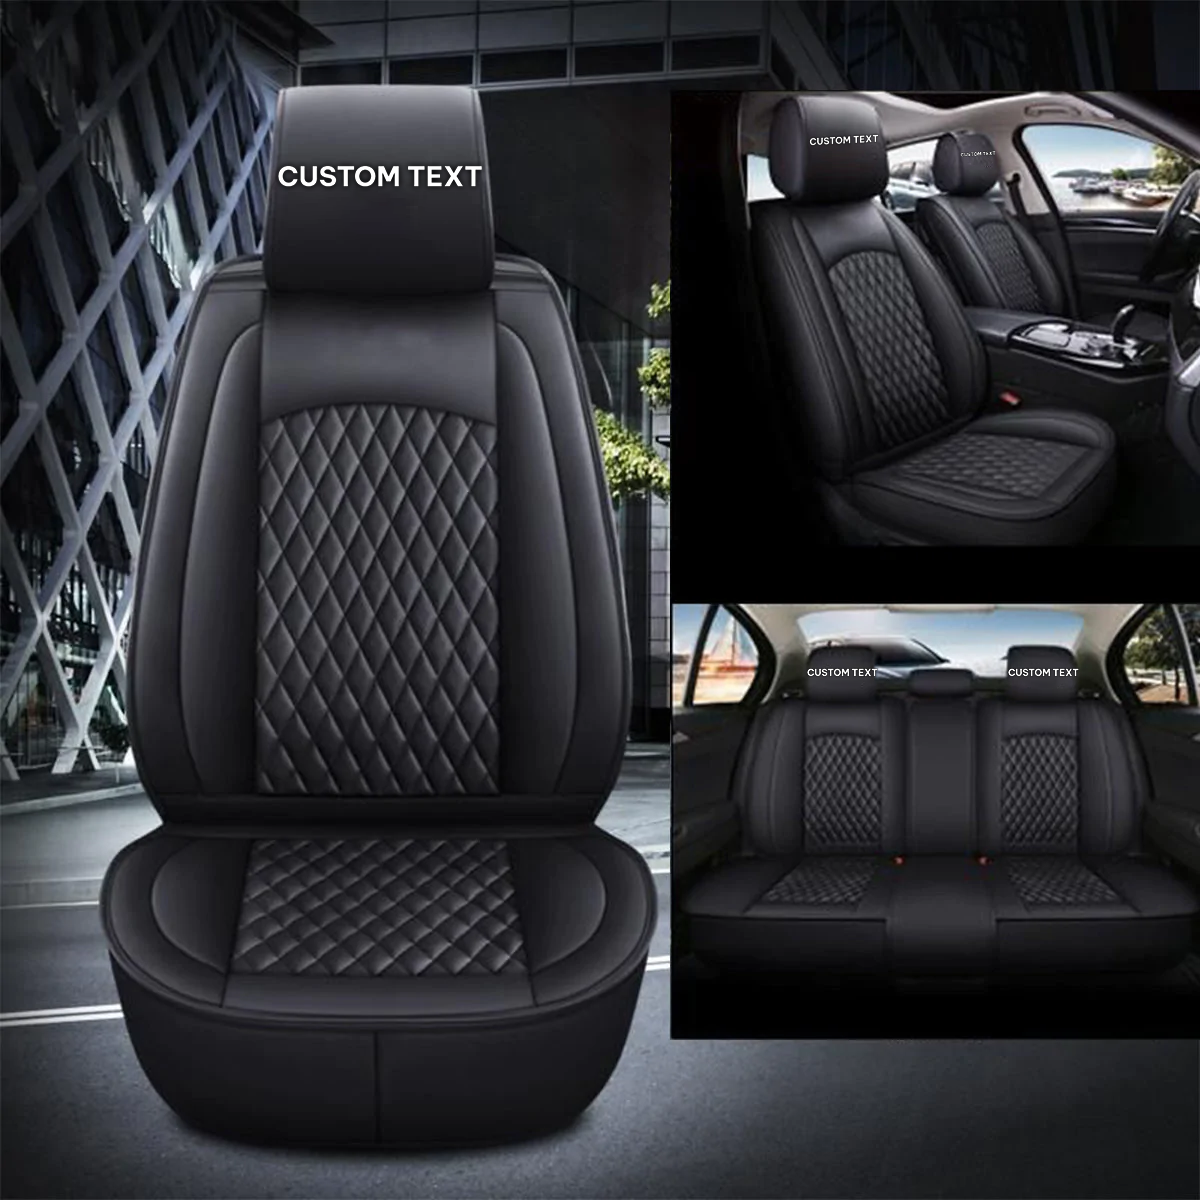 Custom Text For Seat Covers 5 Seats Full Set, Custom Fit For Your Cars, Leatherette Automotive Seat Cushion Protector Universal Fit, Vehicle Auto Interior Decor MB13988